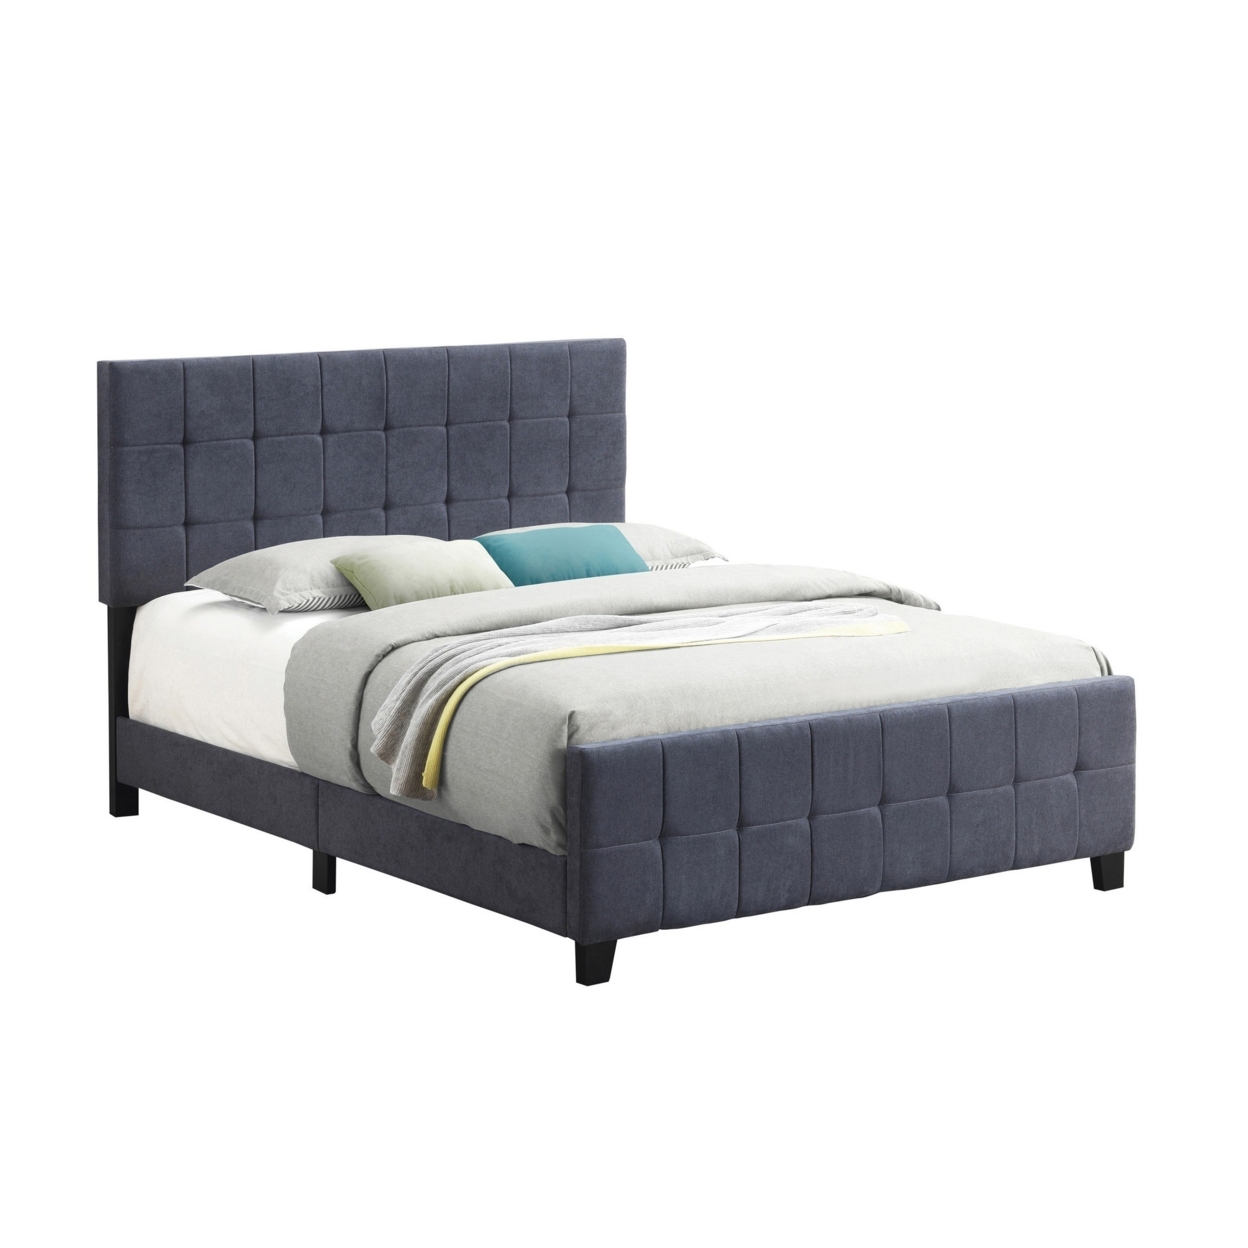 Feny Modern Style Wood King Size Bed, Grid Tufted Gray Fabric Upholstered